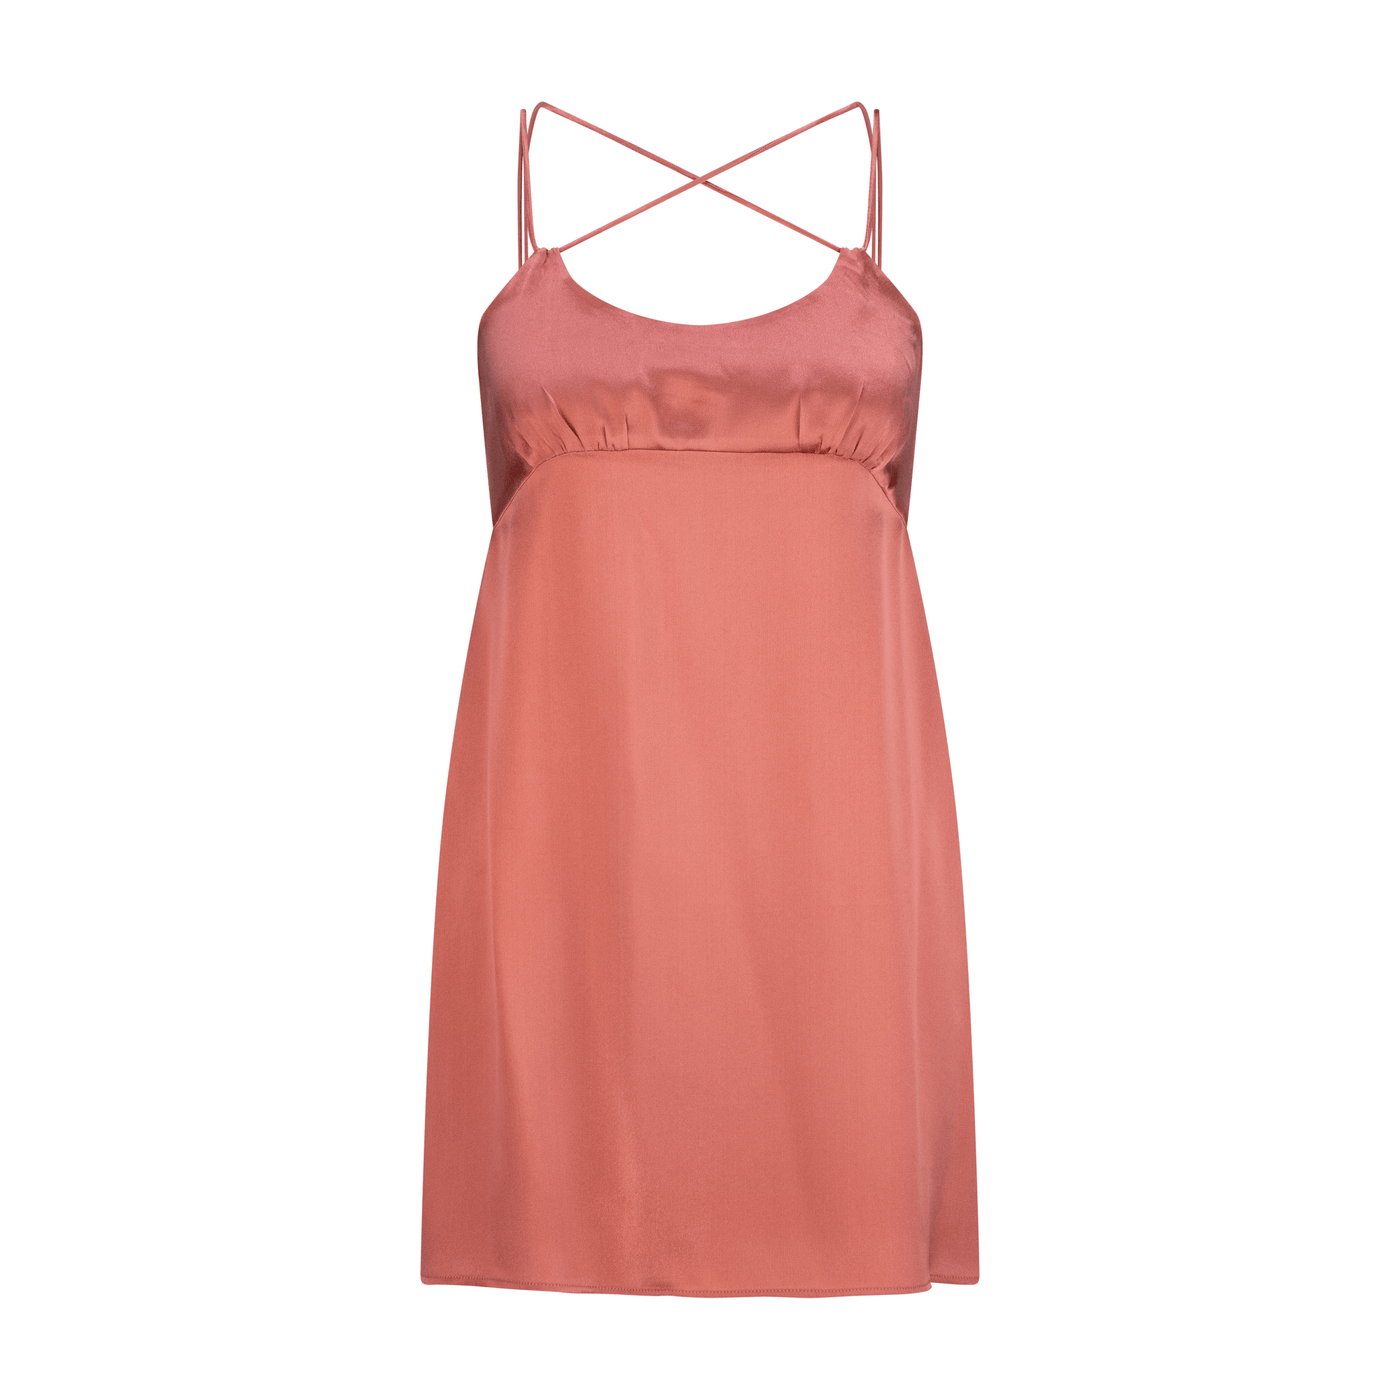 Lilly Pilly Collection bluesign® certified silk Ella Slip in Dusty Pink, as a 3D image of front view